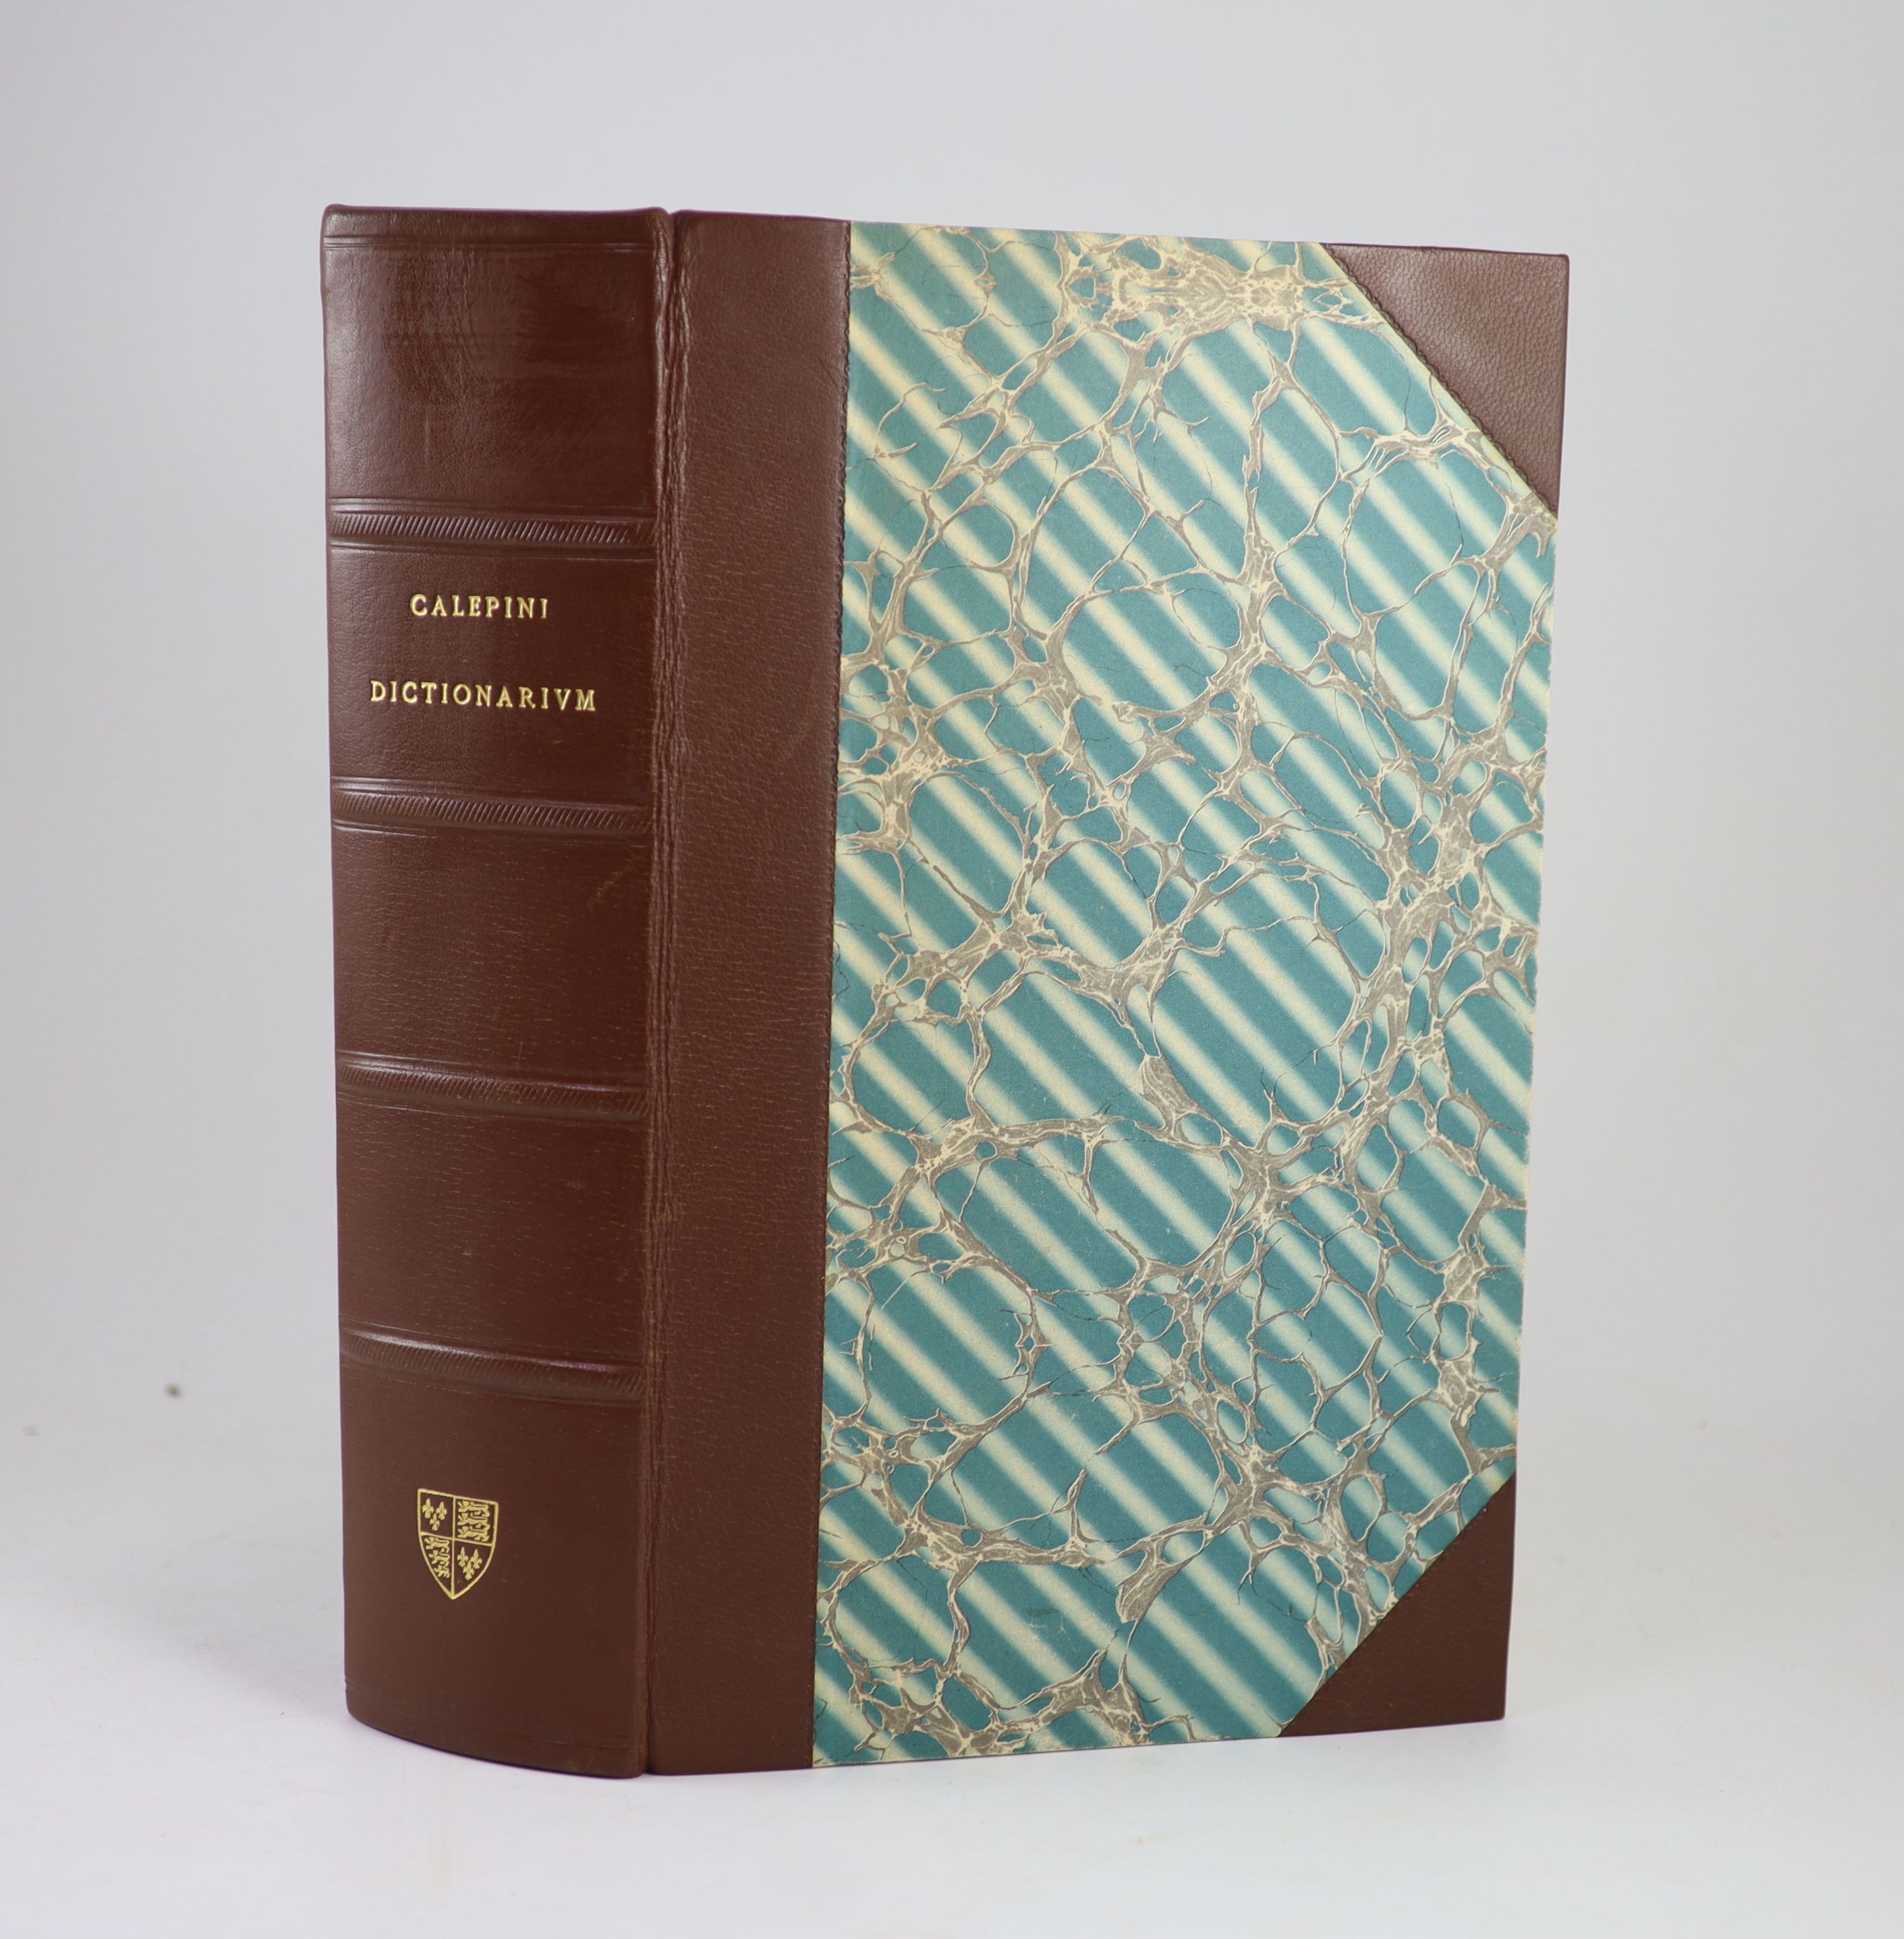 Calepini, Ambrose - Dictionarium Octolingue....engraved title device, headpiece decorations, decorated initial letters; newly rebound half morocco and marbled boards, gilt lettered panelled spine, thick folio.